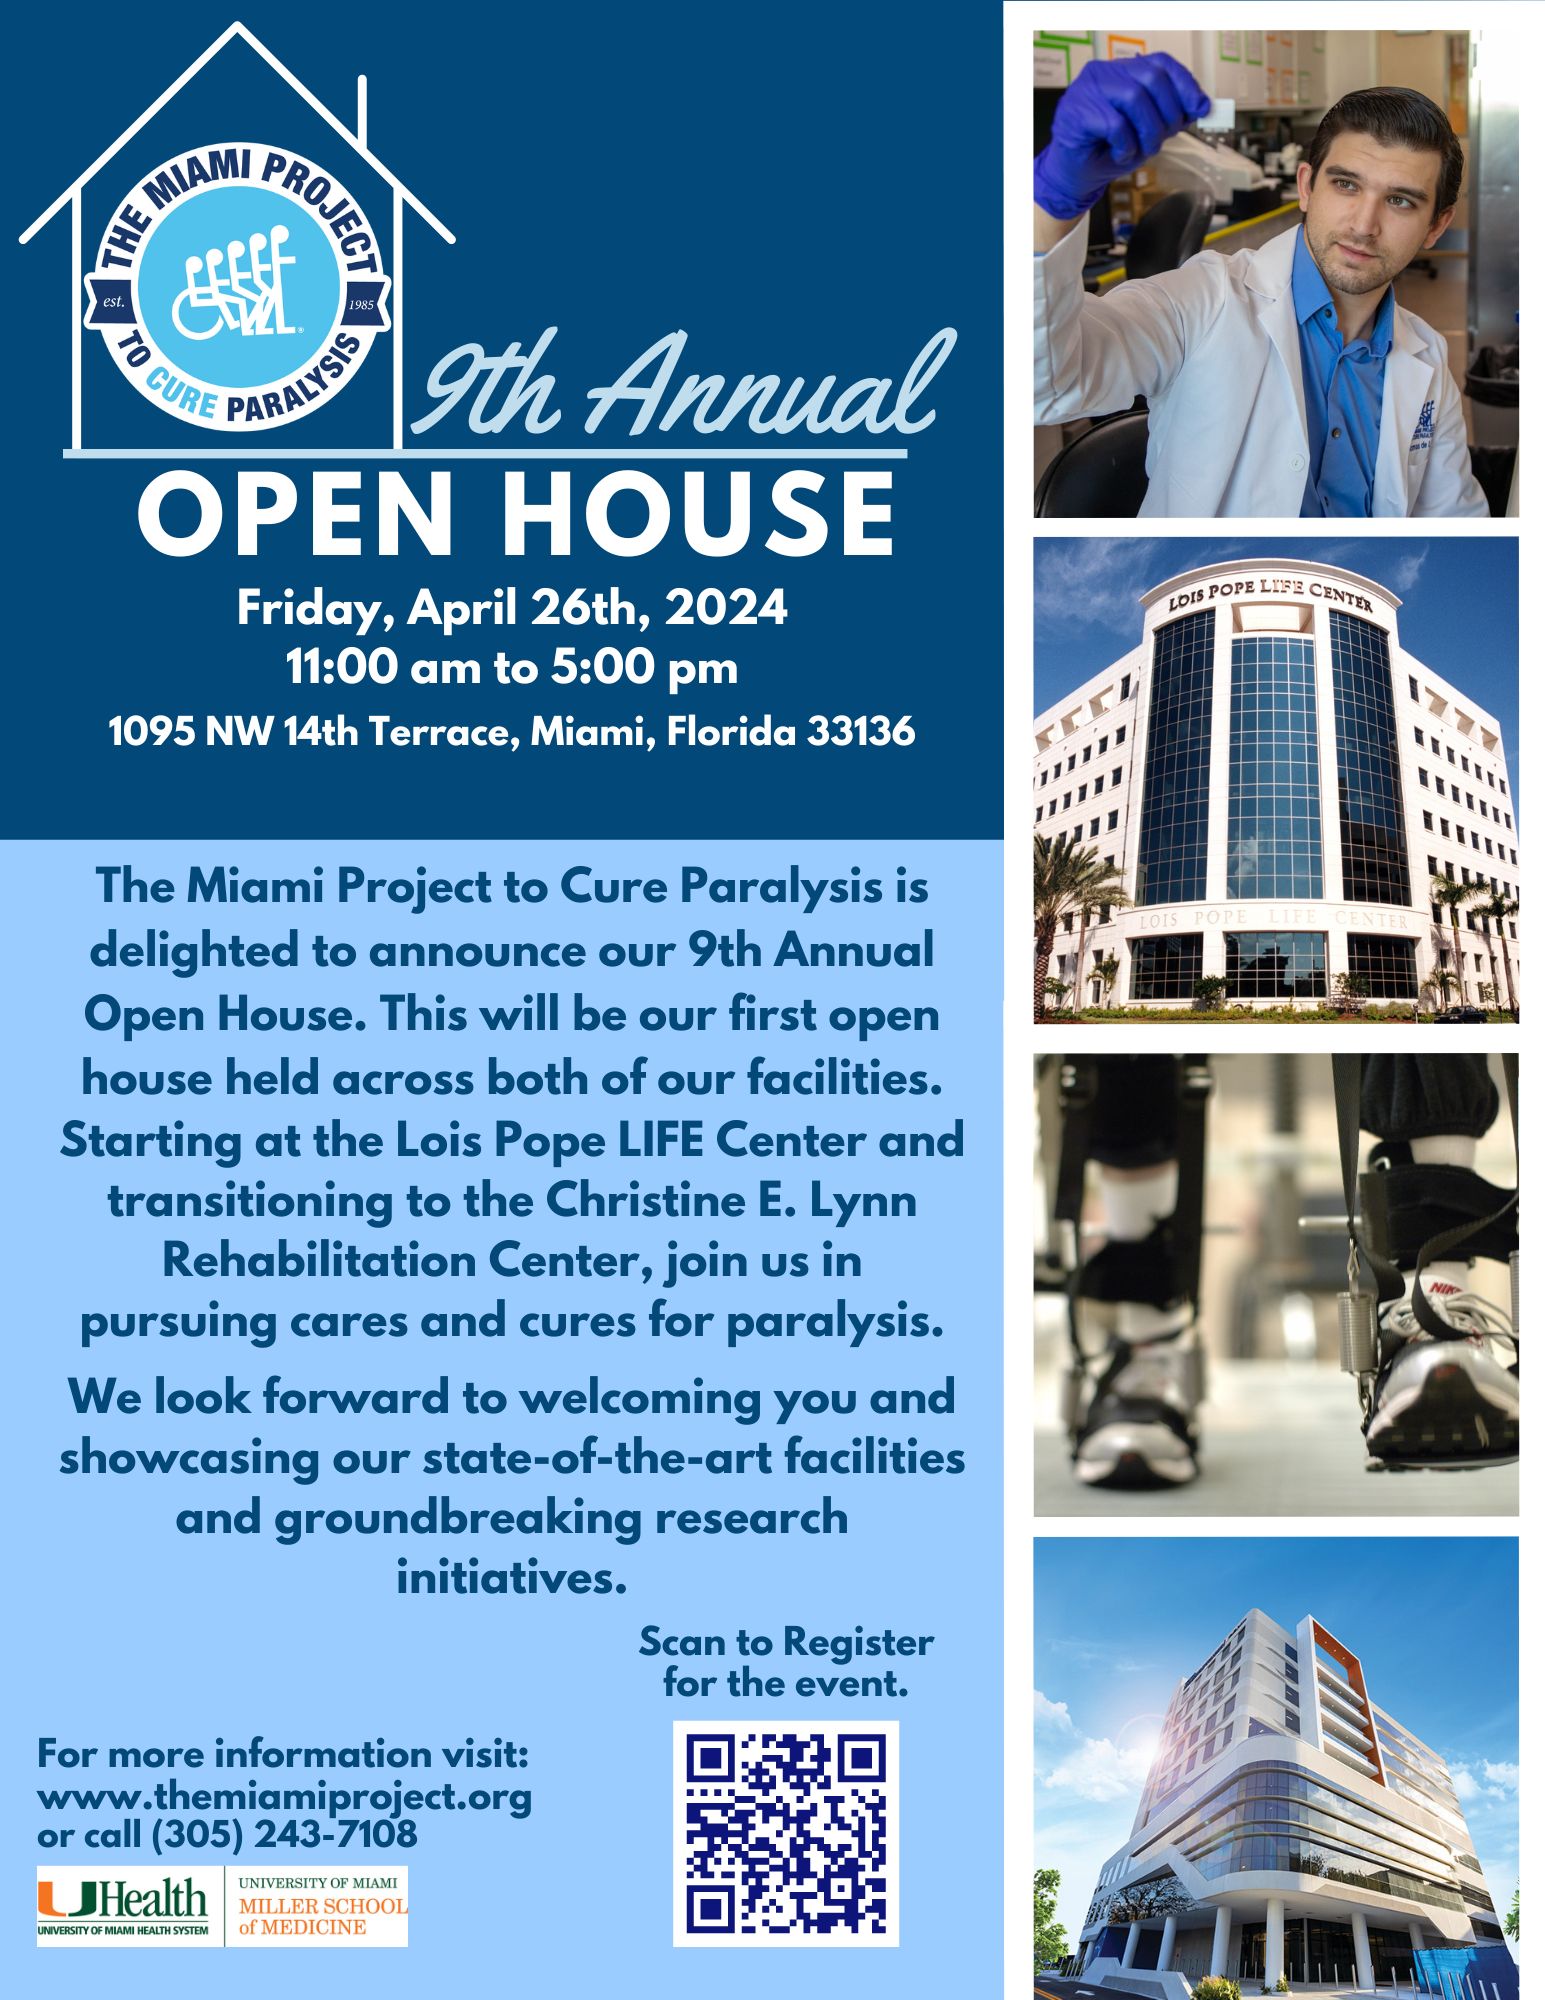 The Miami Project's 9th Annual Open House